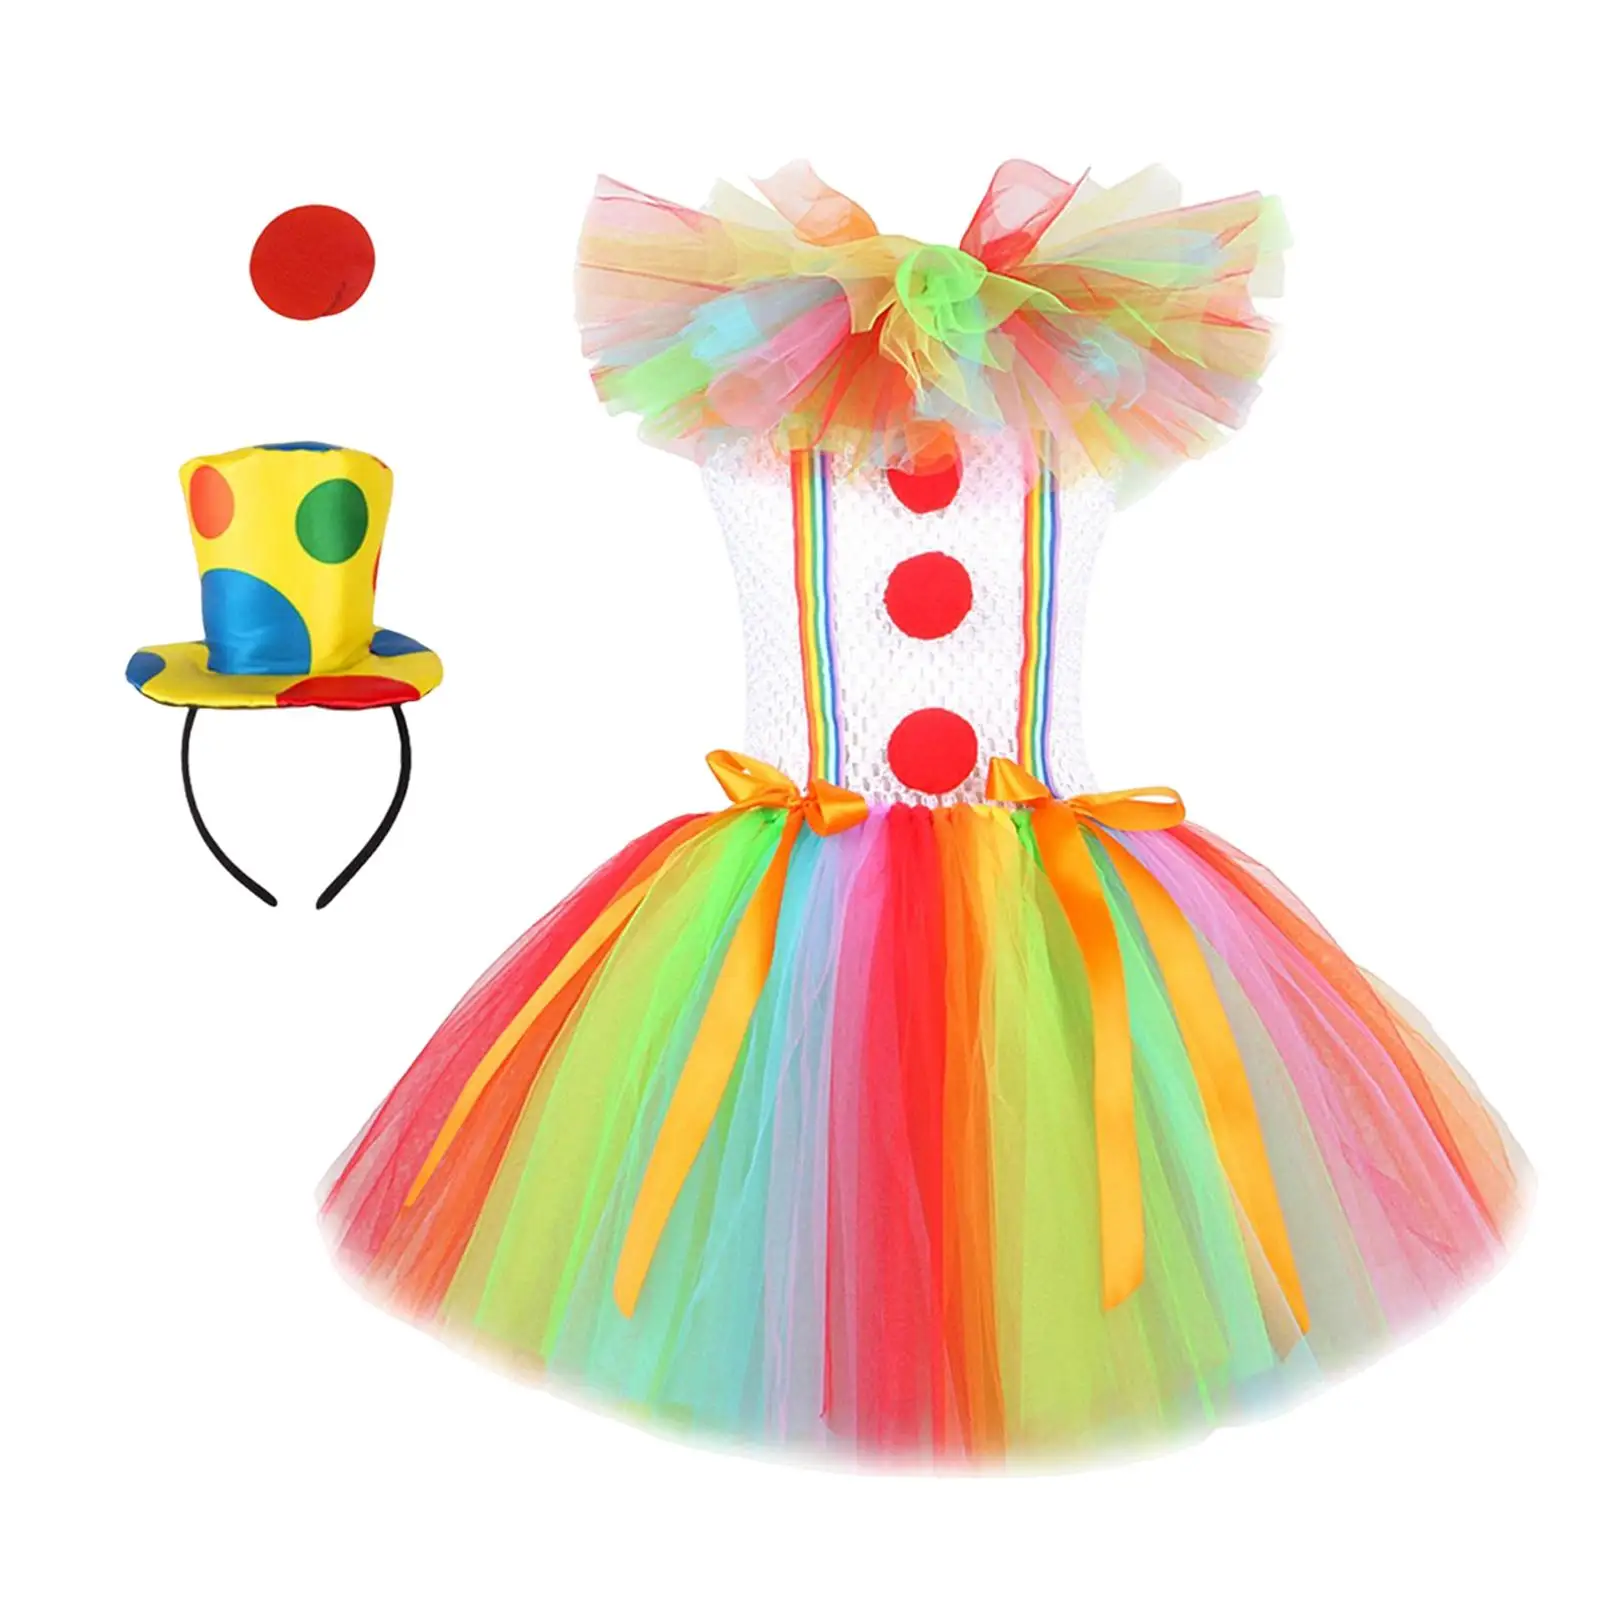 Child Girl Clown Costume Mesh Tutu Dress Outfits with Hat Hair Hoop Fancy Dress up Costume for Halloween Accessory Exquisite